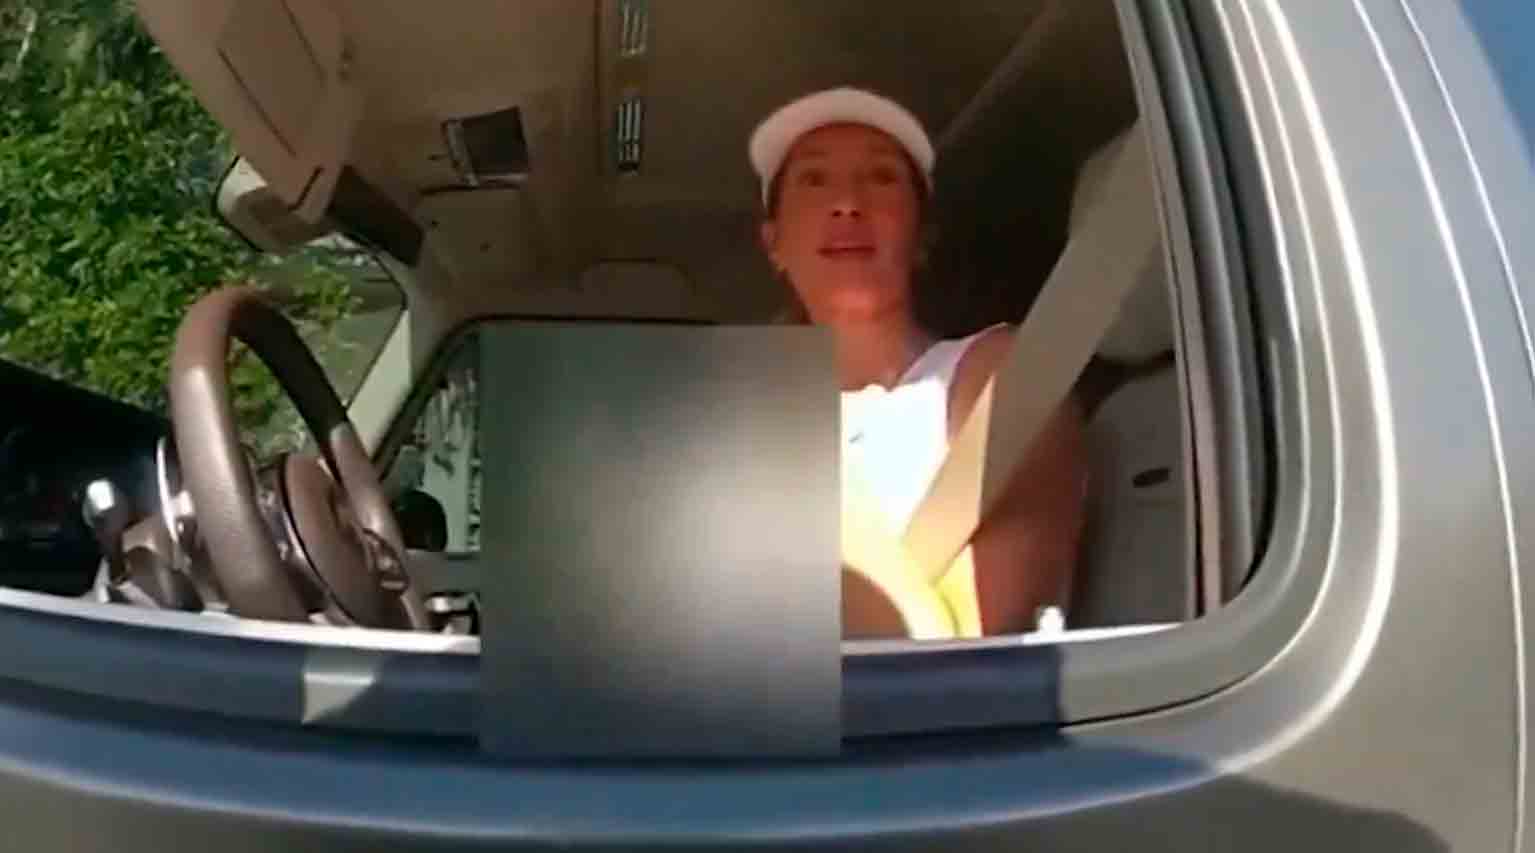 Video: Gisele Bündchen cries during police stop due to paparazzi harassment. Photo and video: Twitter @gagirlpolitics